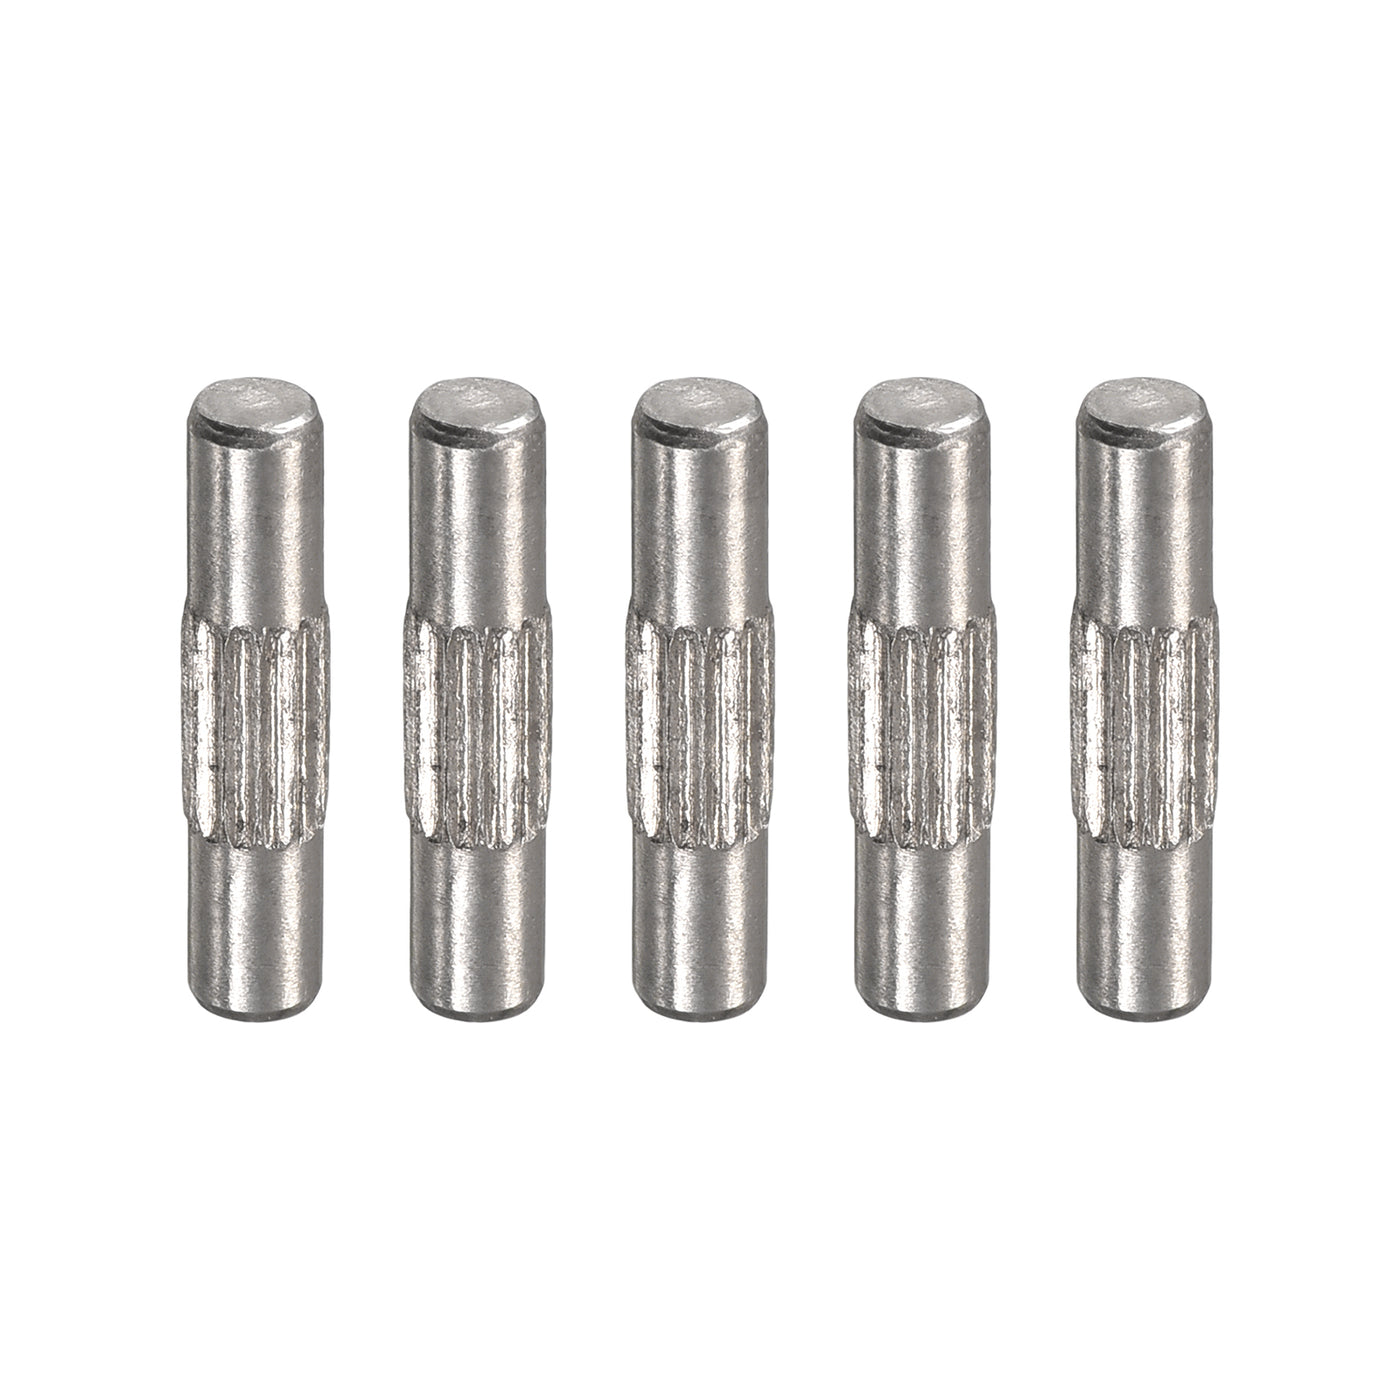 uxcell Uxcell 3x14mm 304 Stainless Steel Dowel Pins, 5Pcs Center Knurled Chamfered End Pin